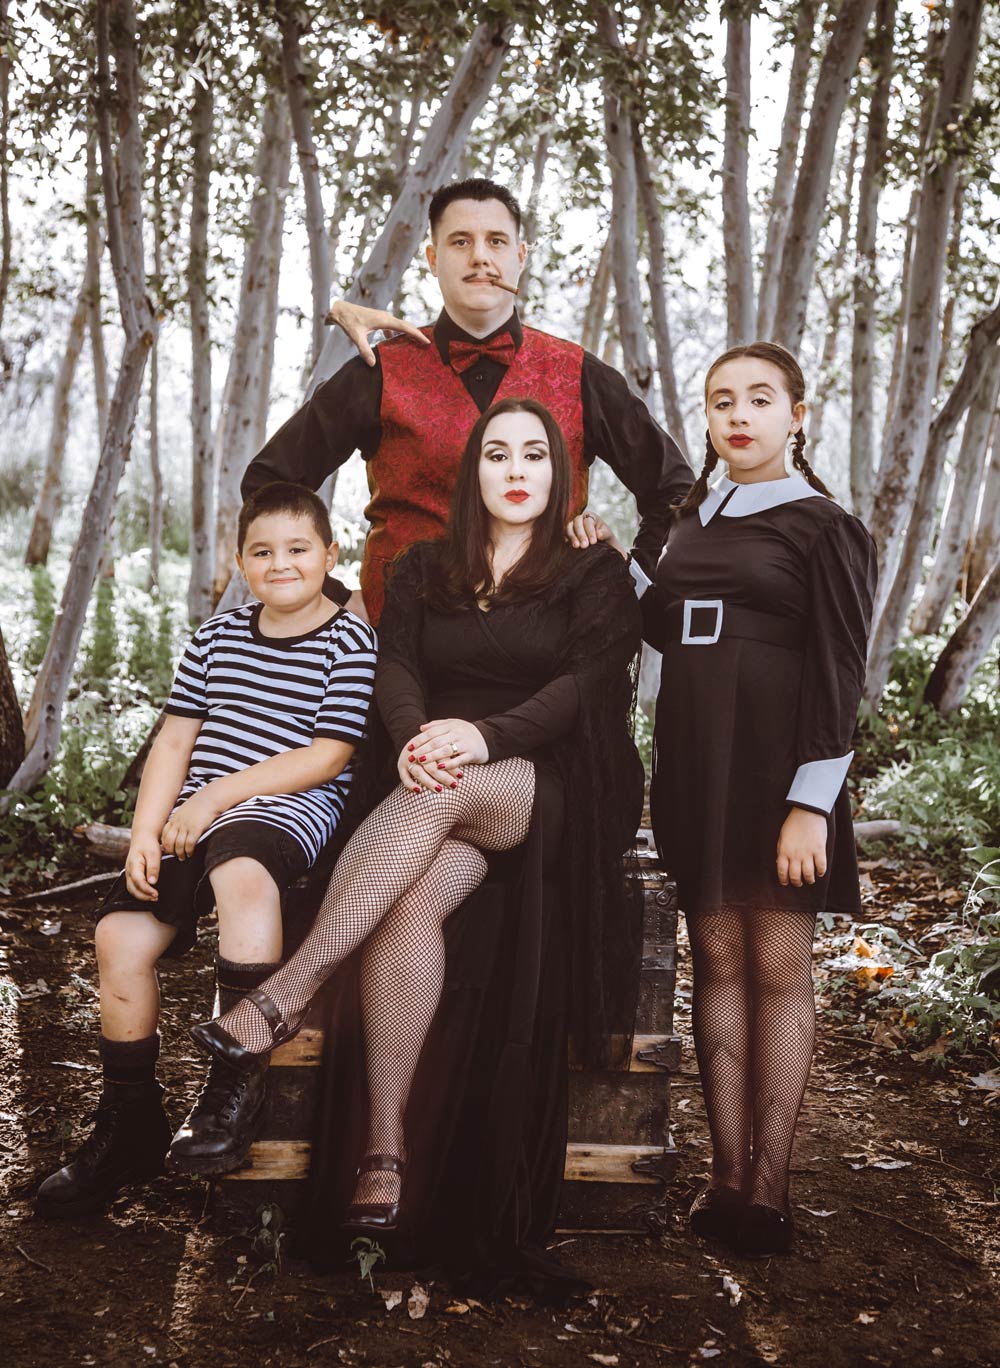 Just your typical family photo | Odd Stuff Magazine